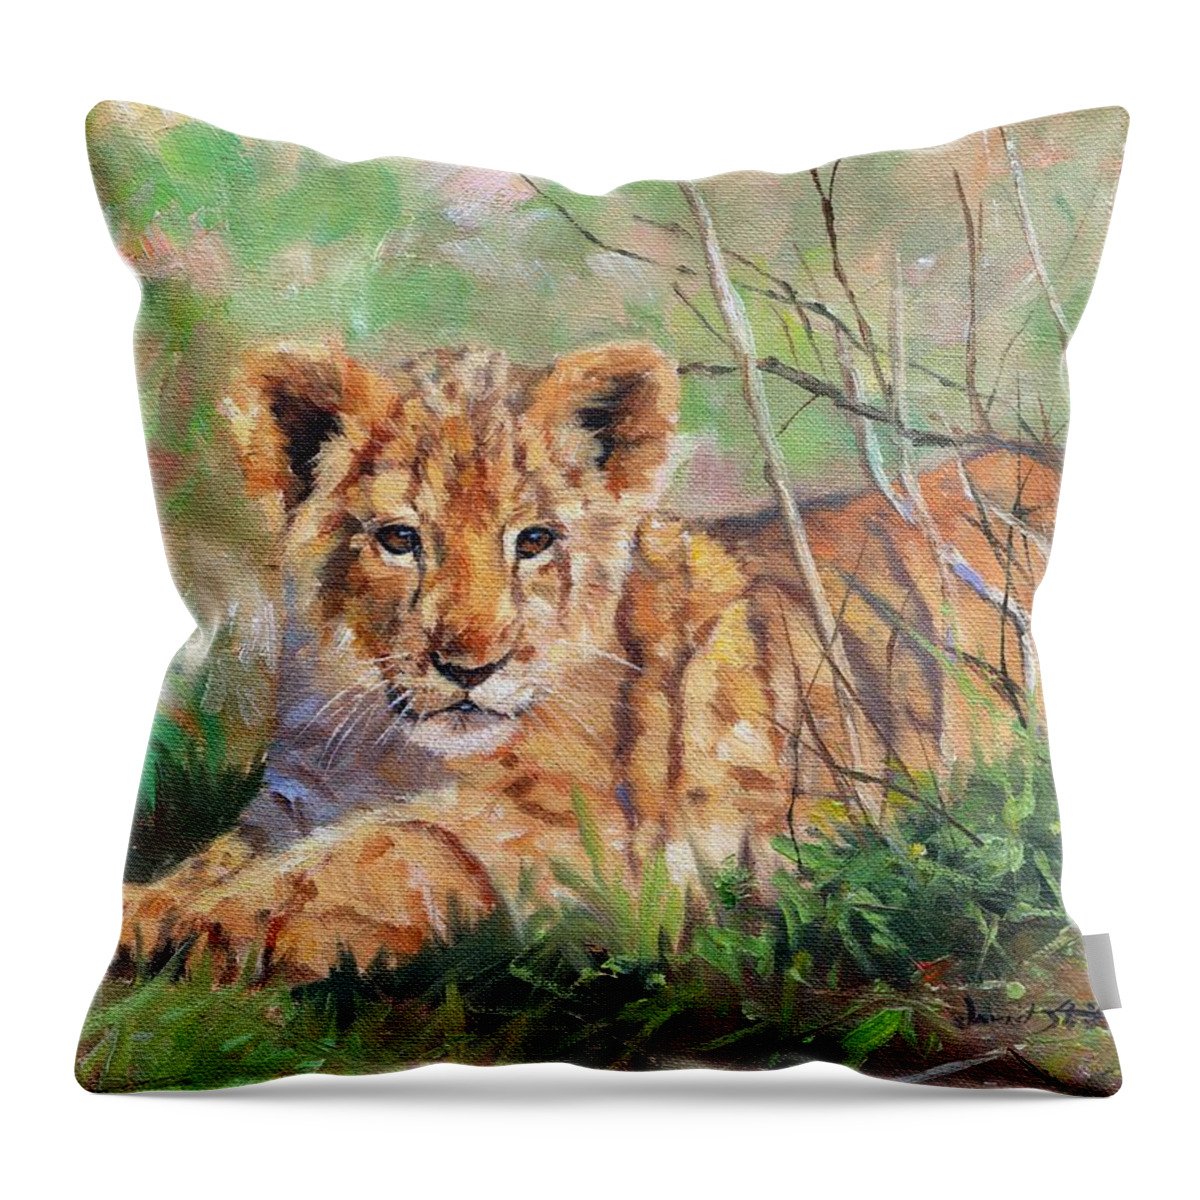 Lion Throw Pillow featuring the painting Lion Cub #3 by David Stribbling